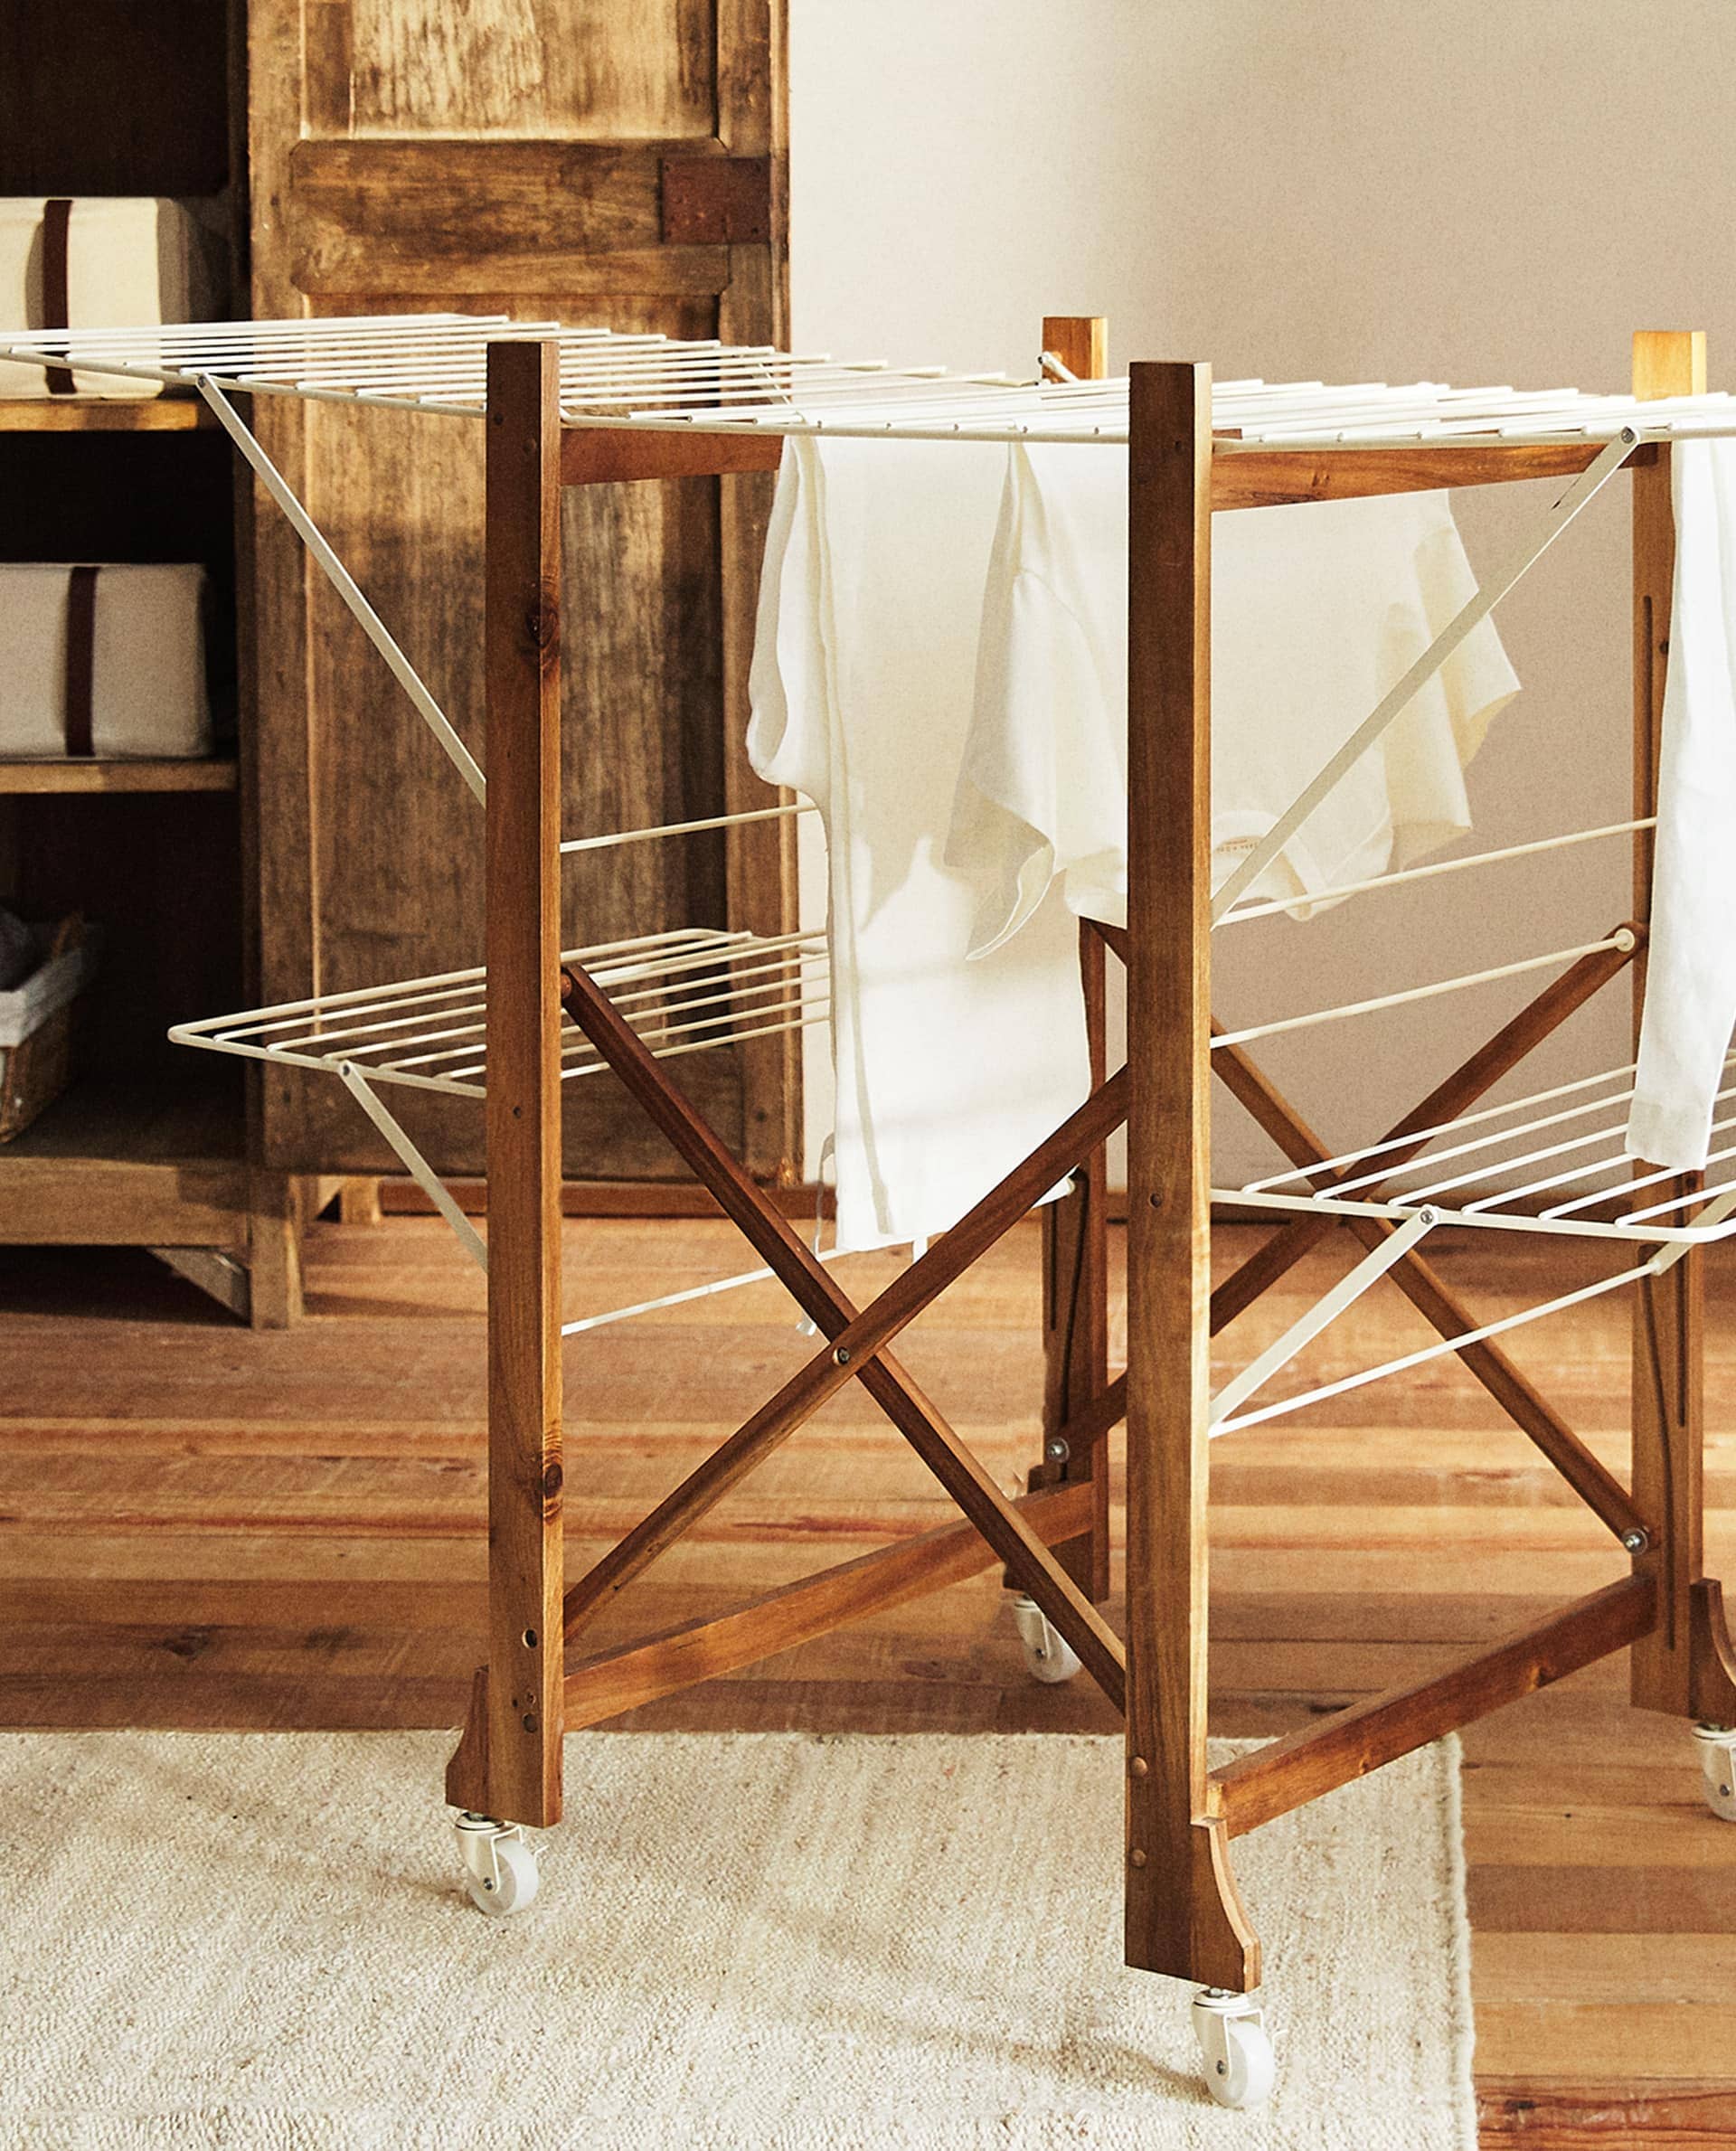 ZARA HOME FOLDING WOODEN AND METAL CLOTHES DRYING RACK